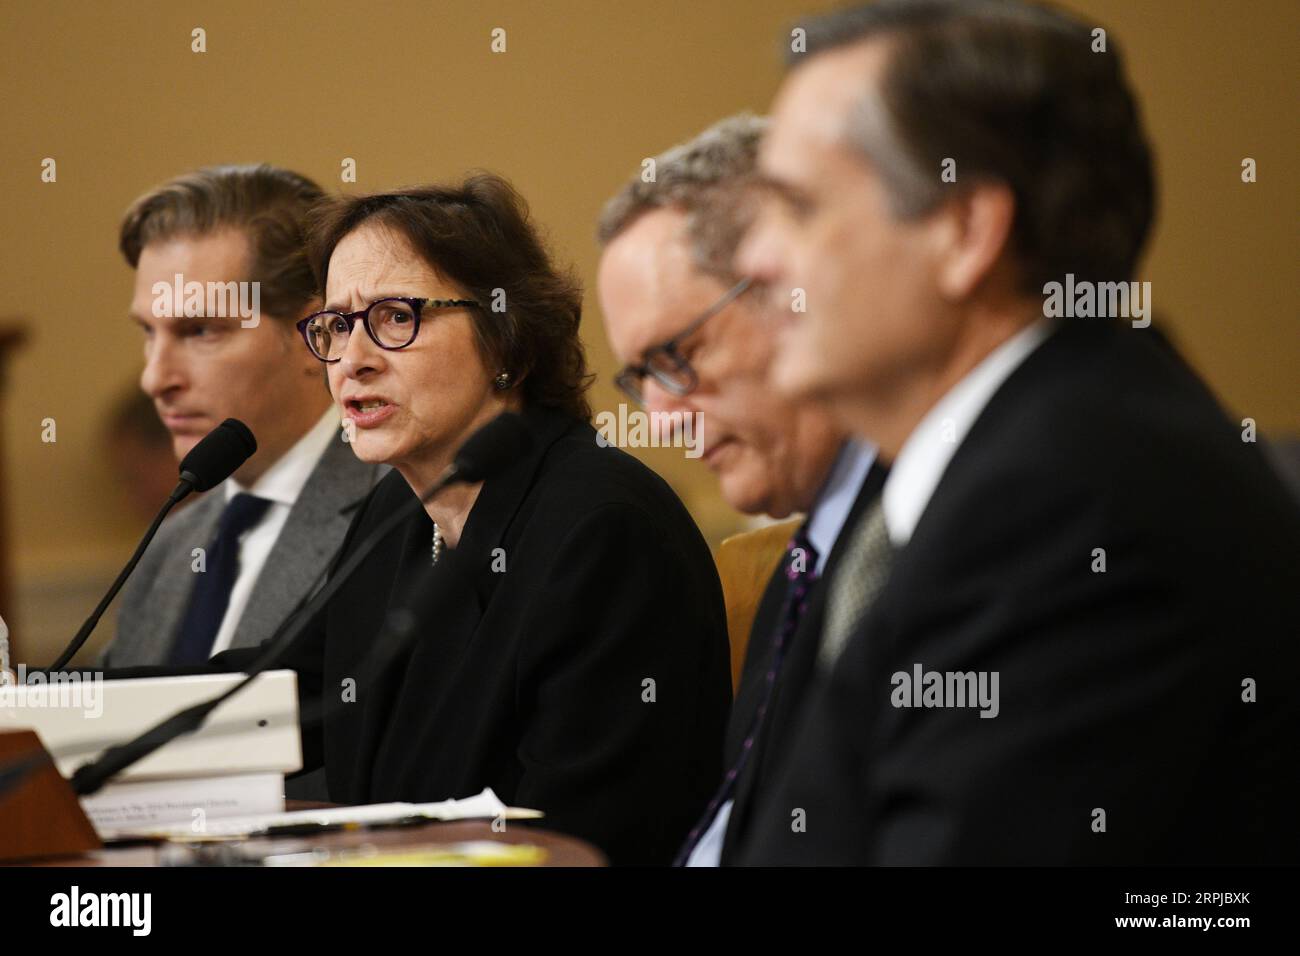 191204 -- WASHINGTON, Dec. 4, 2019 -- Stanford University Law Professor Pamela Karlan 2nd L testifies before the U.S. House Judiciary Committee on Capitol Hill in Washington D.C., the United States, on Dec. 4, 2019. The Democrat-led House Judiciary Committee took over a months-long impeachment proceeding into U.S. President Donald Trump by holding its first hearing on Wednesday.  U.S.-WASHINGTON D.C.-HOUSE-JUDICIARY COMMITTEE-HEARING-IMPEACHMENT INQUIRY-TRUMP LiuxJie PUBLICATIONxNOTxINxCHN Stock Photo